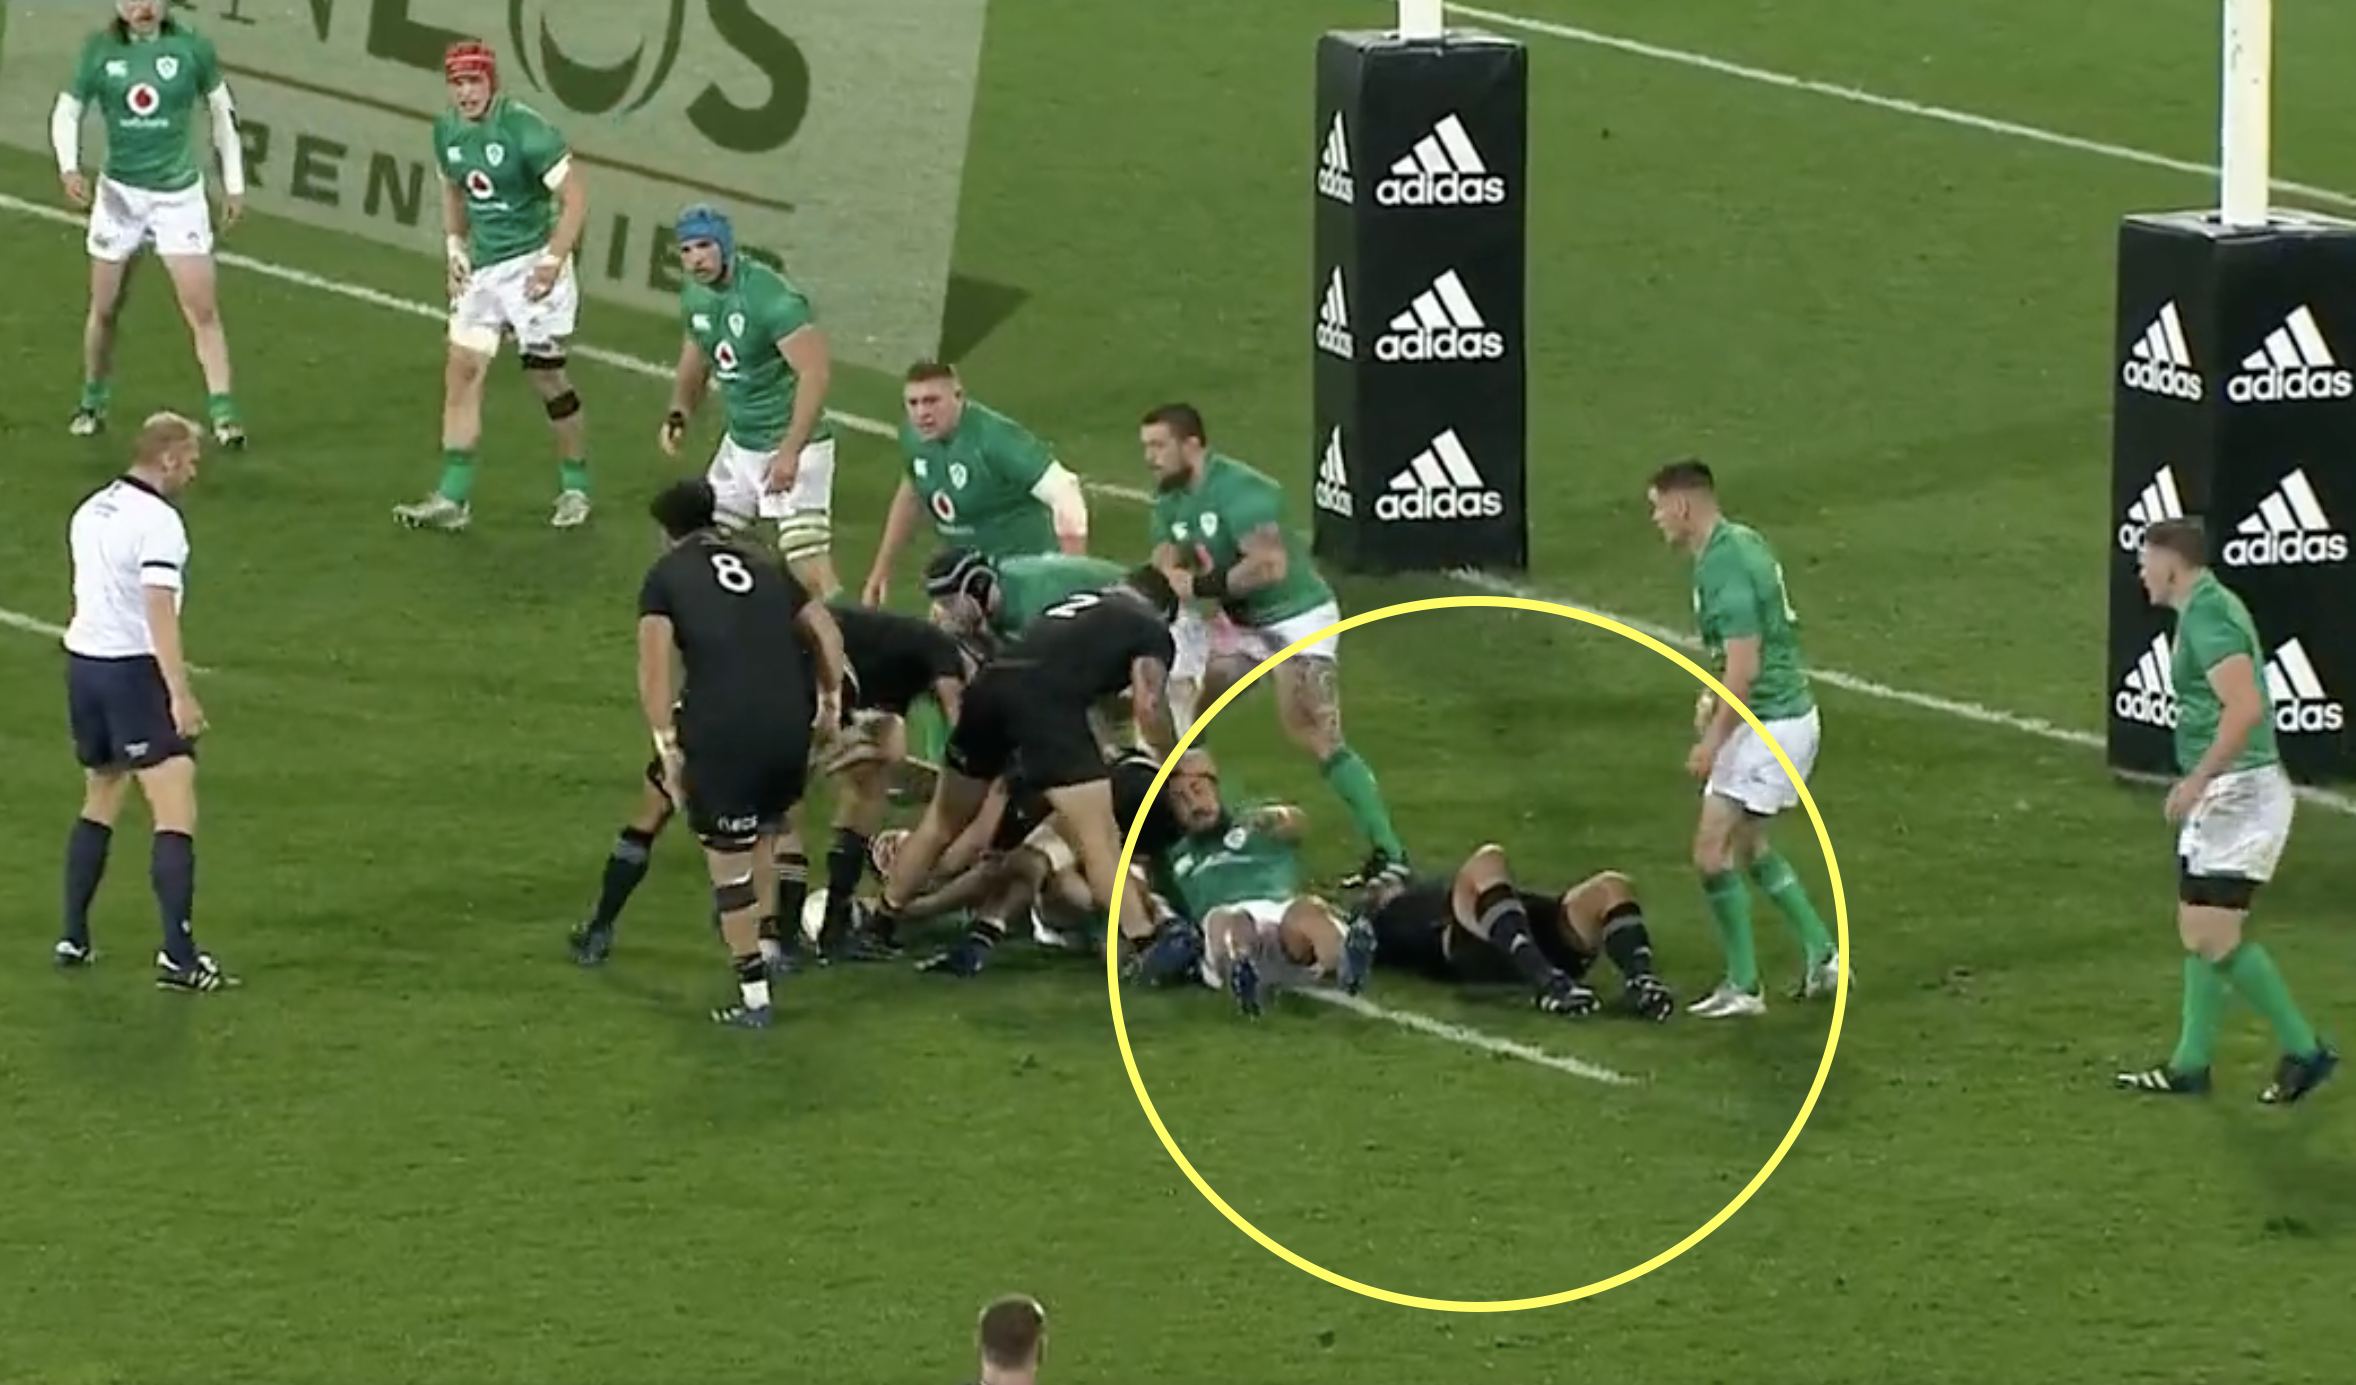 Ireland incredibly lucky after officials miss appalling straight red challenge